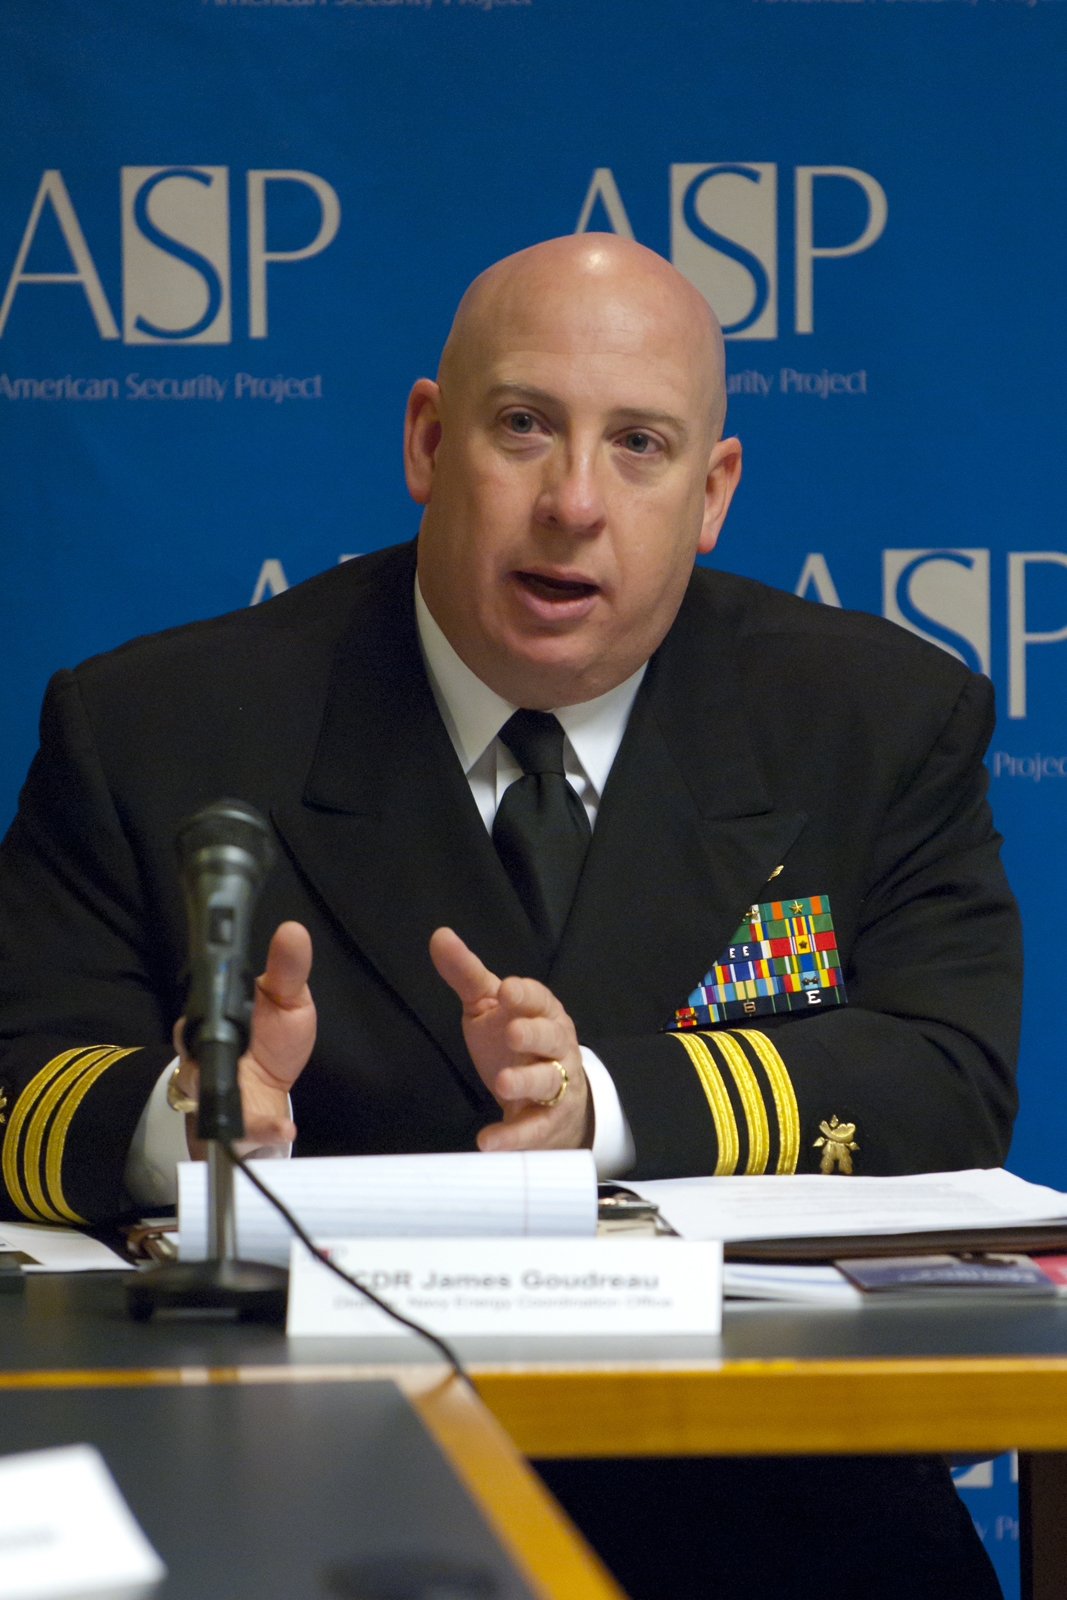 ASP Briefing: “Biofuels for National Security”